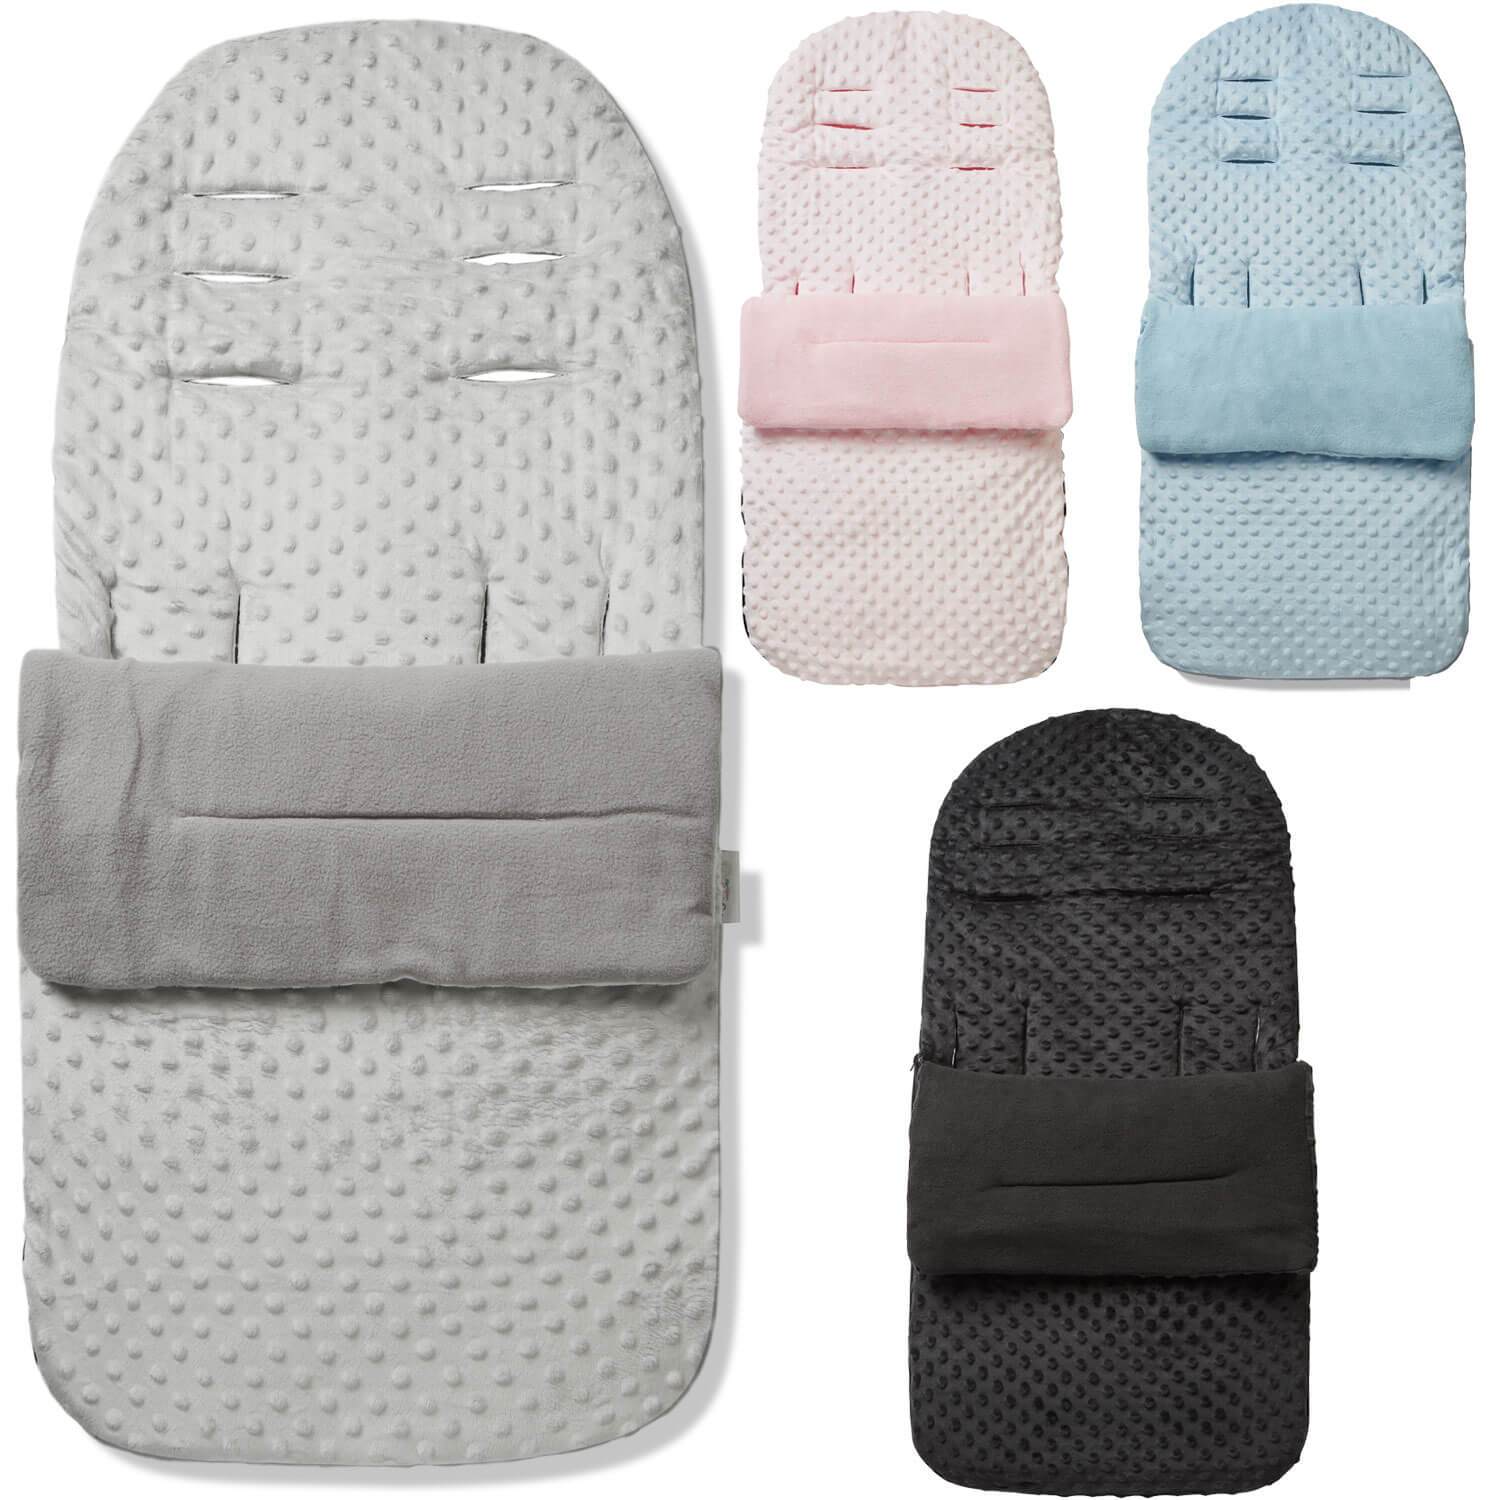 Dimple Footmuff / Cosy Toes Compatible with Uppababy - For Your Little One